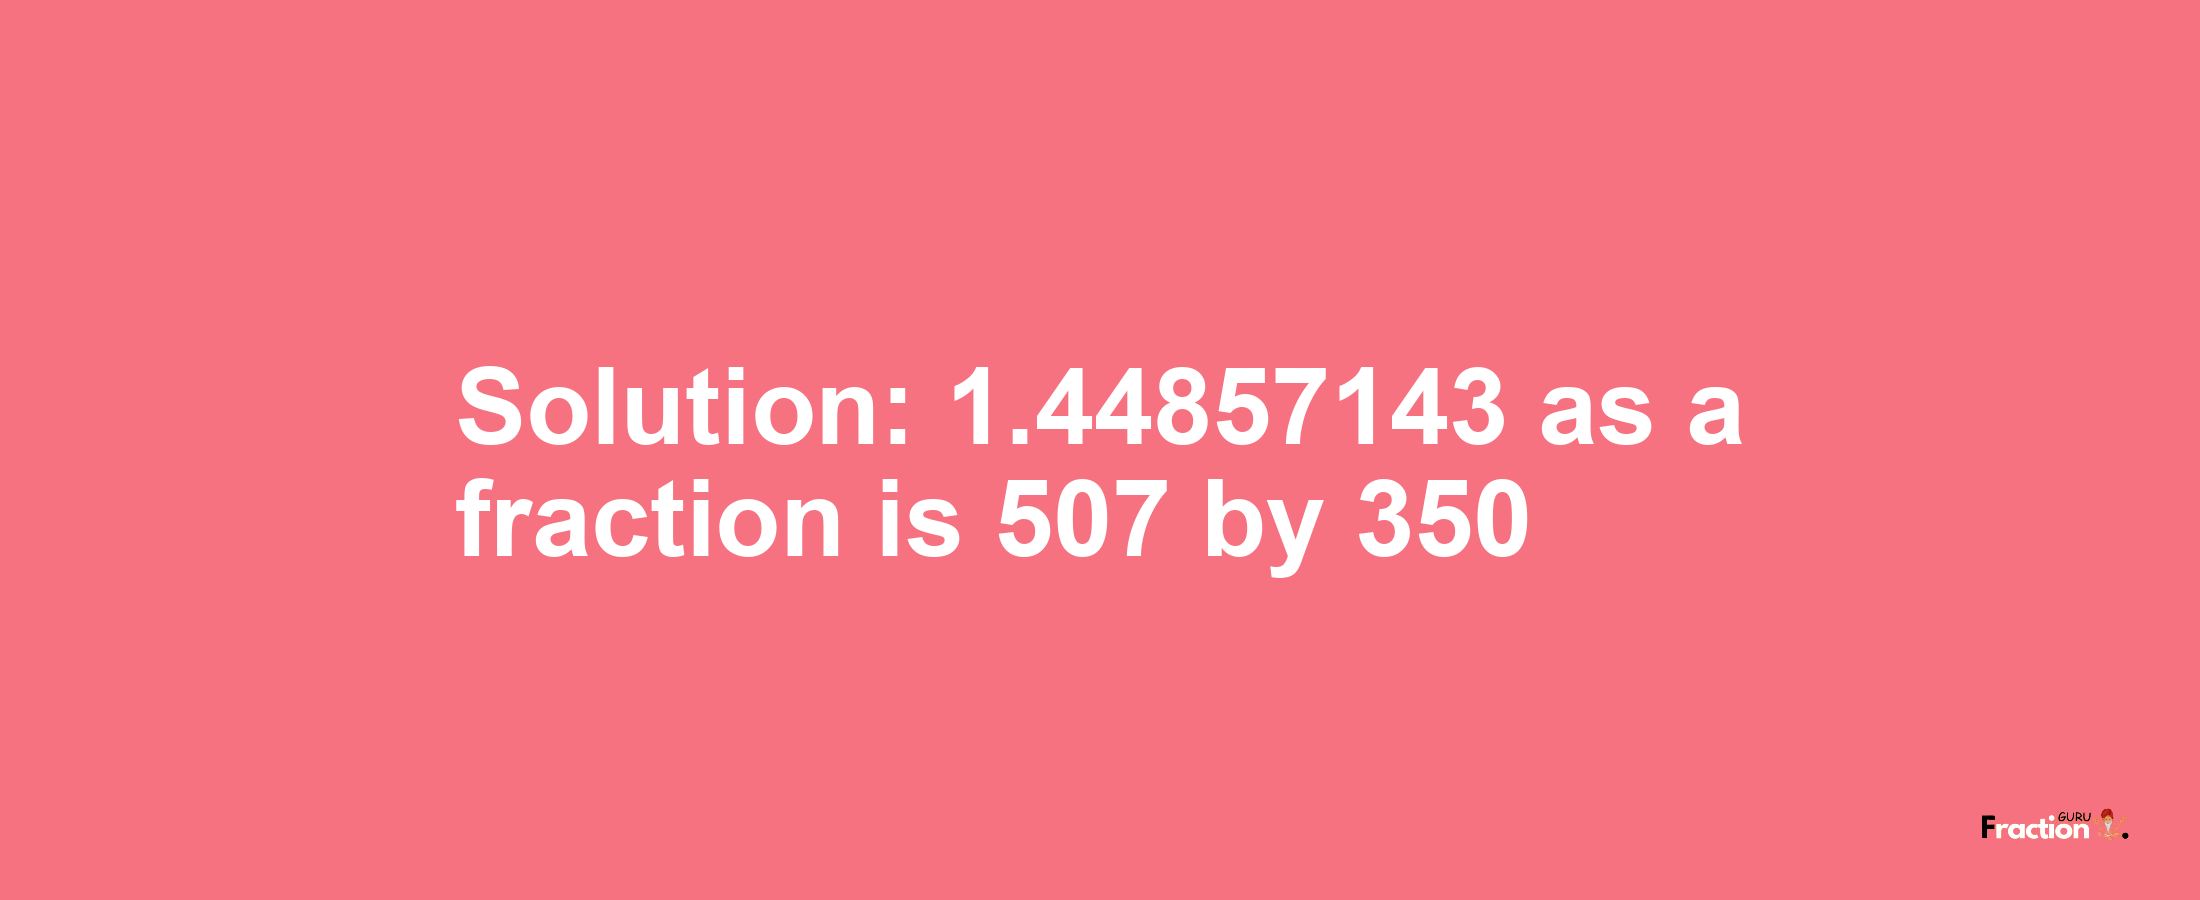 Solution:1.44857143 as a fraction is 507/350